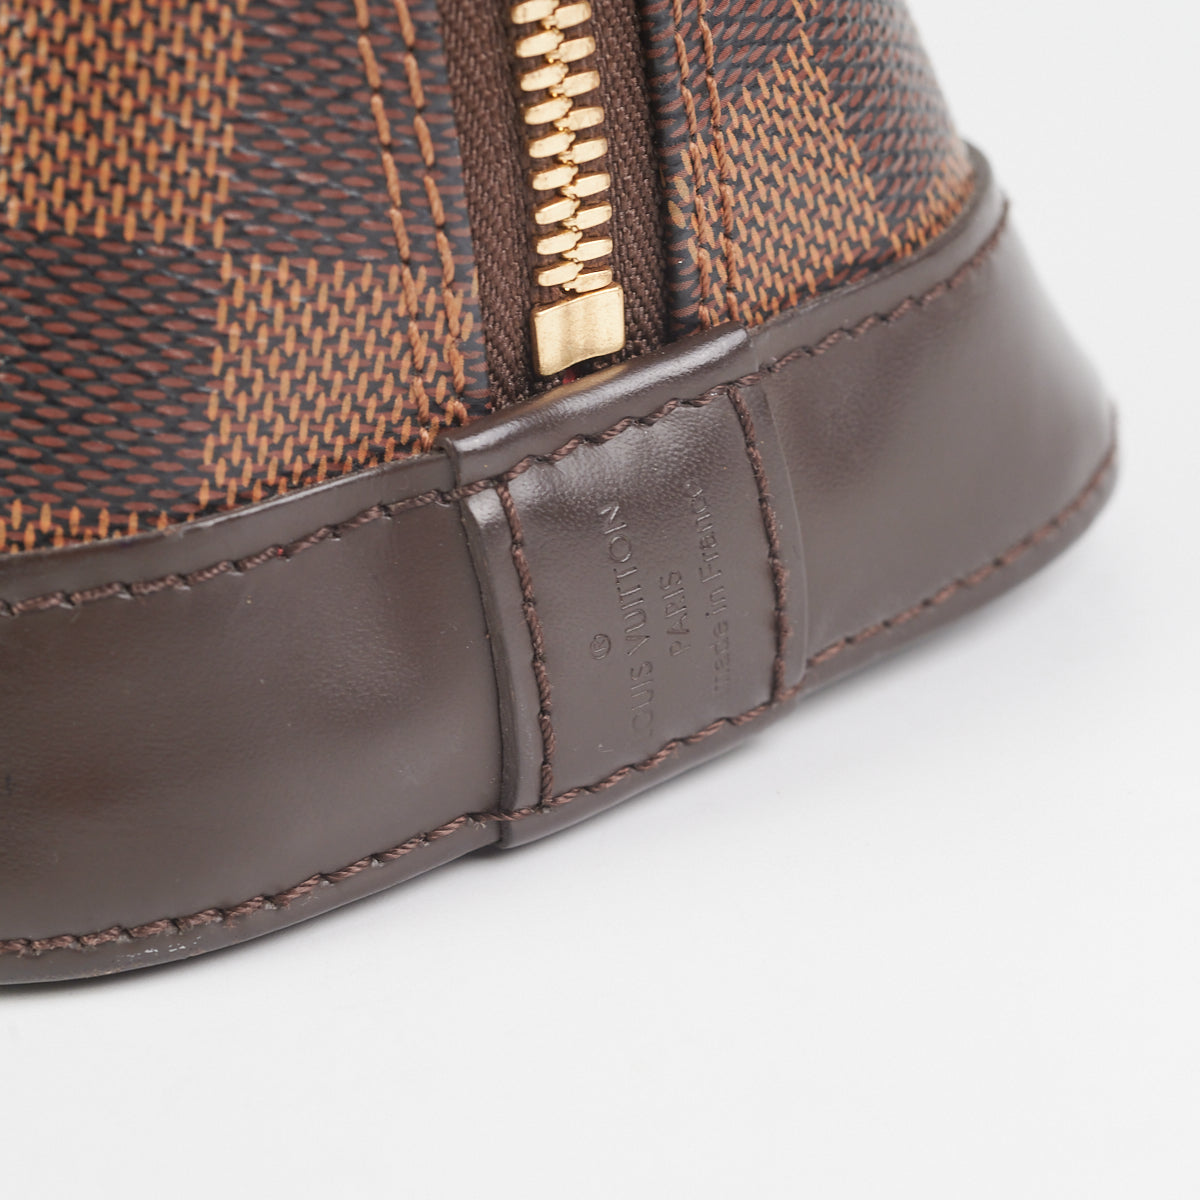 LOUIS VUITTON ALMA BB DAMIER EBENE VS. EPI LEATHER/Mod shots, What fits,  Which one to choose 